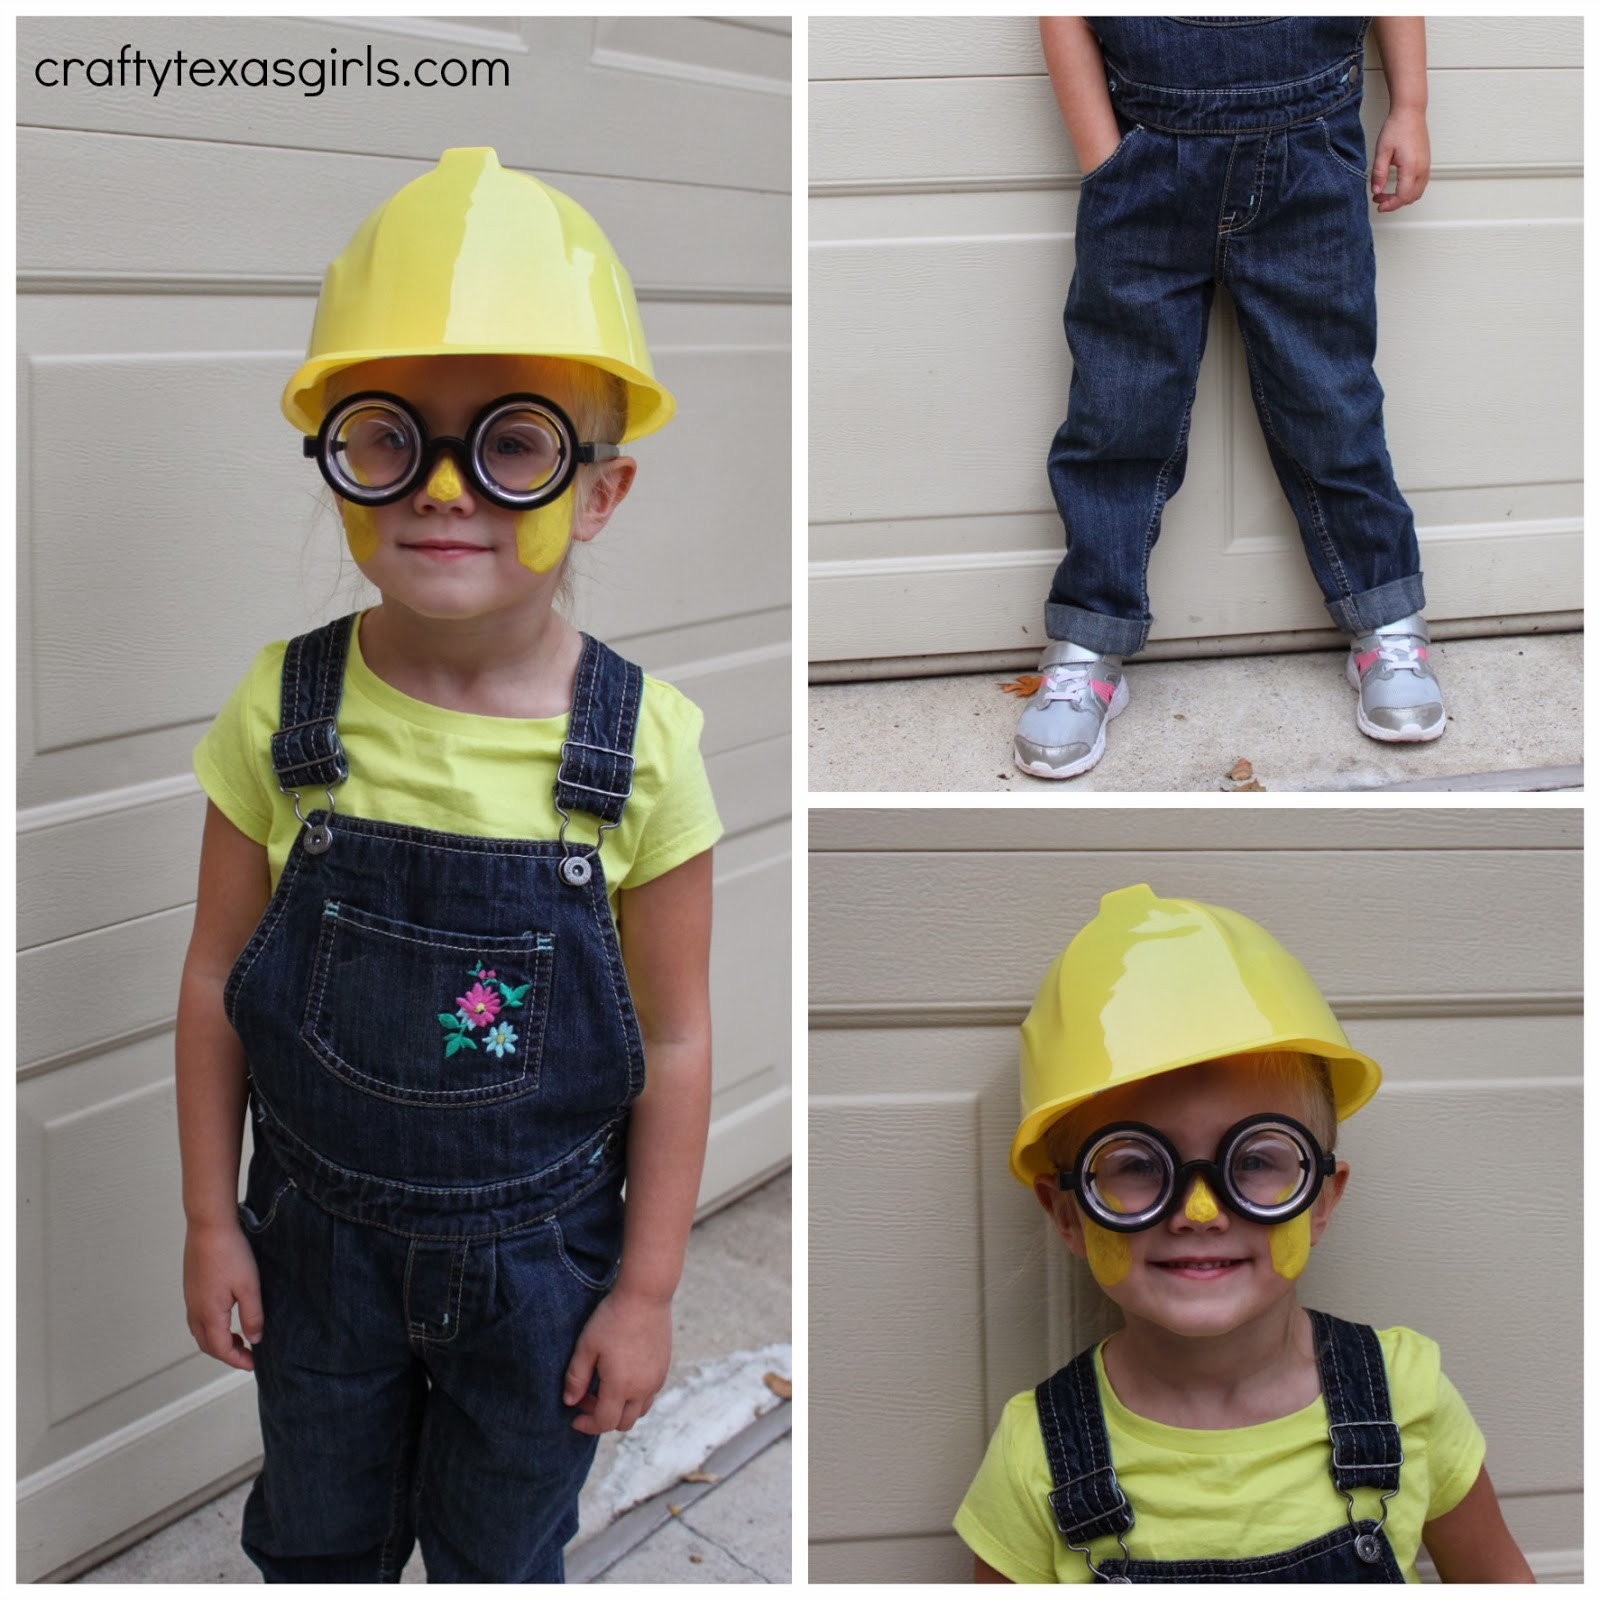 DIY Minion Costume Without Overalls
 Diy Minion Costume Without Overalls How To Make A Minion